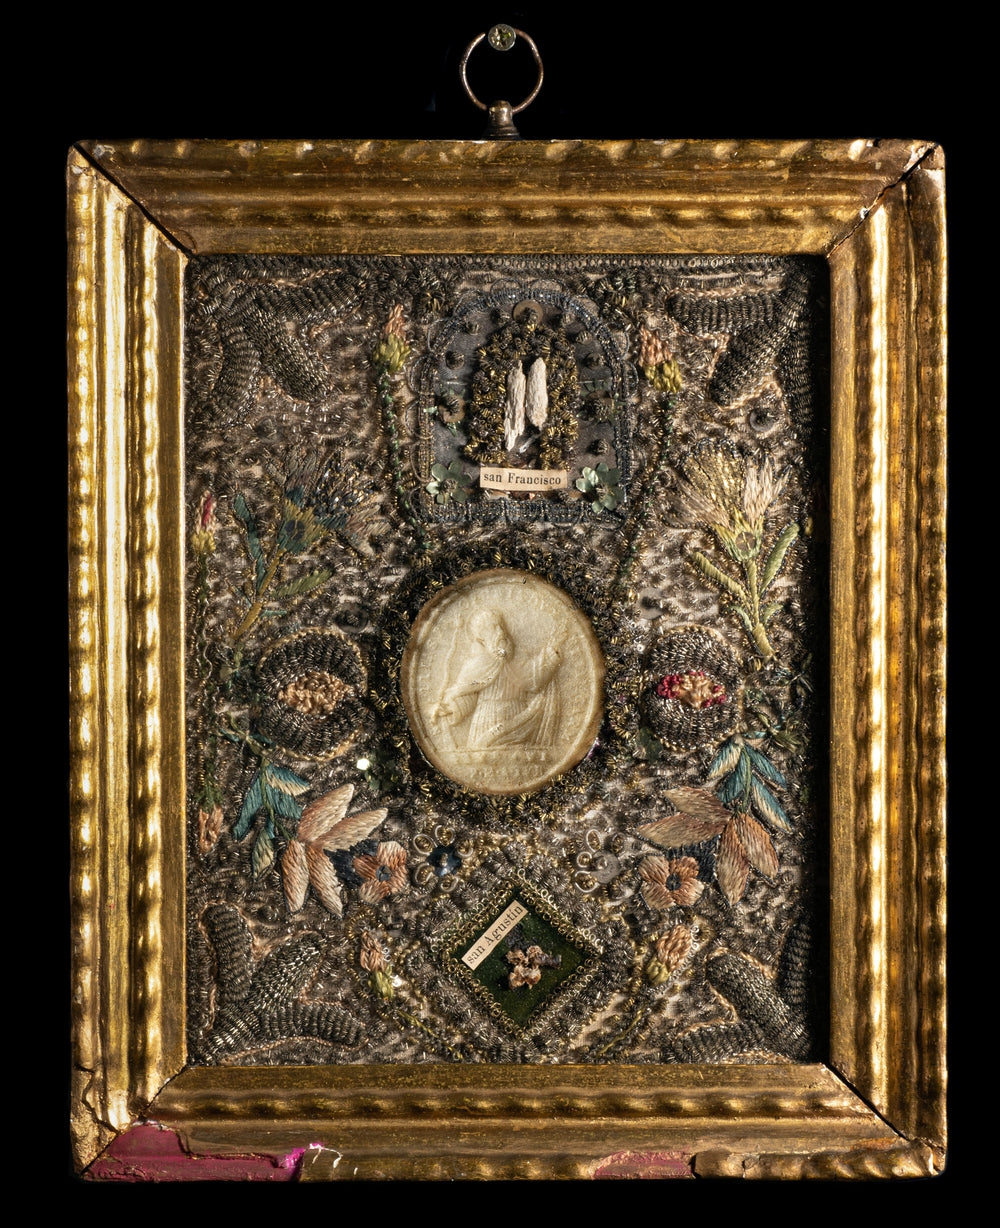 RELIQUARY, FIRST CLASS RELICS EX OSSIBUS OF SAINT FRANCOIS AND SAINT AUGUSTIN - RELICS